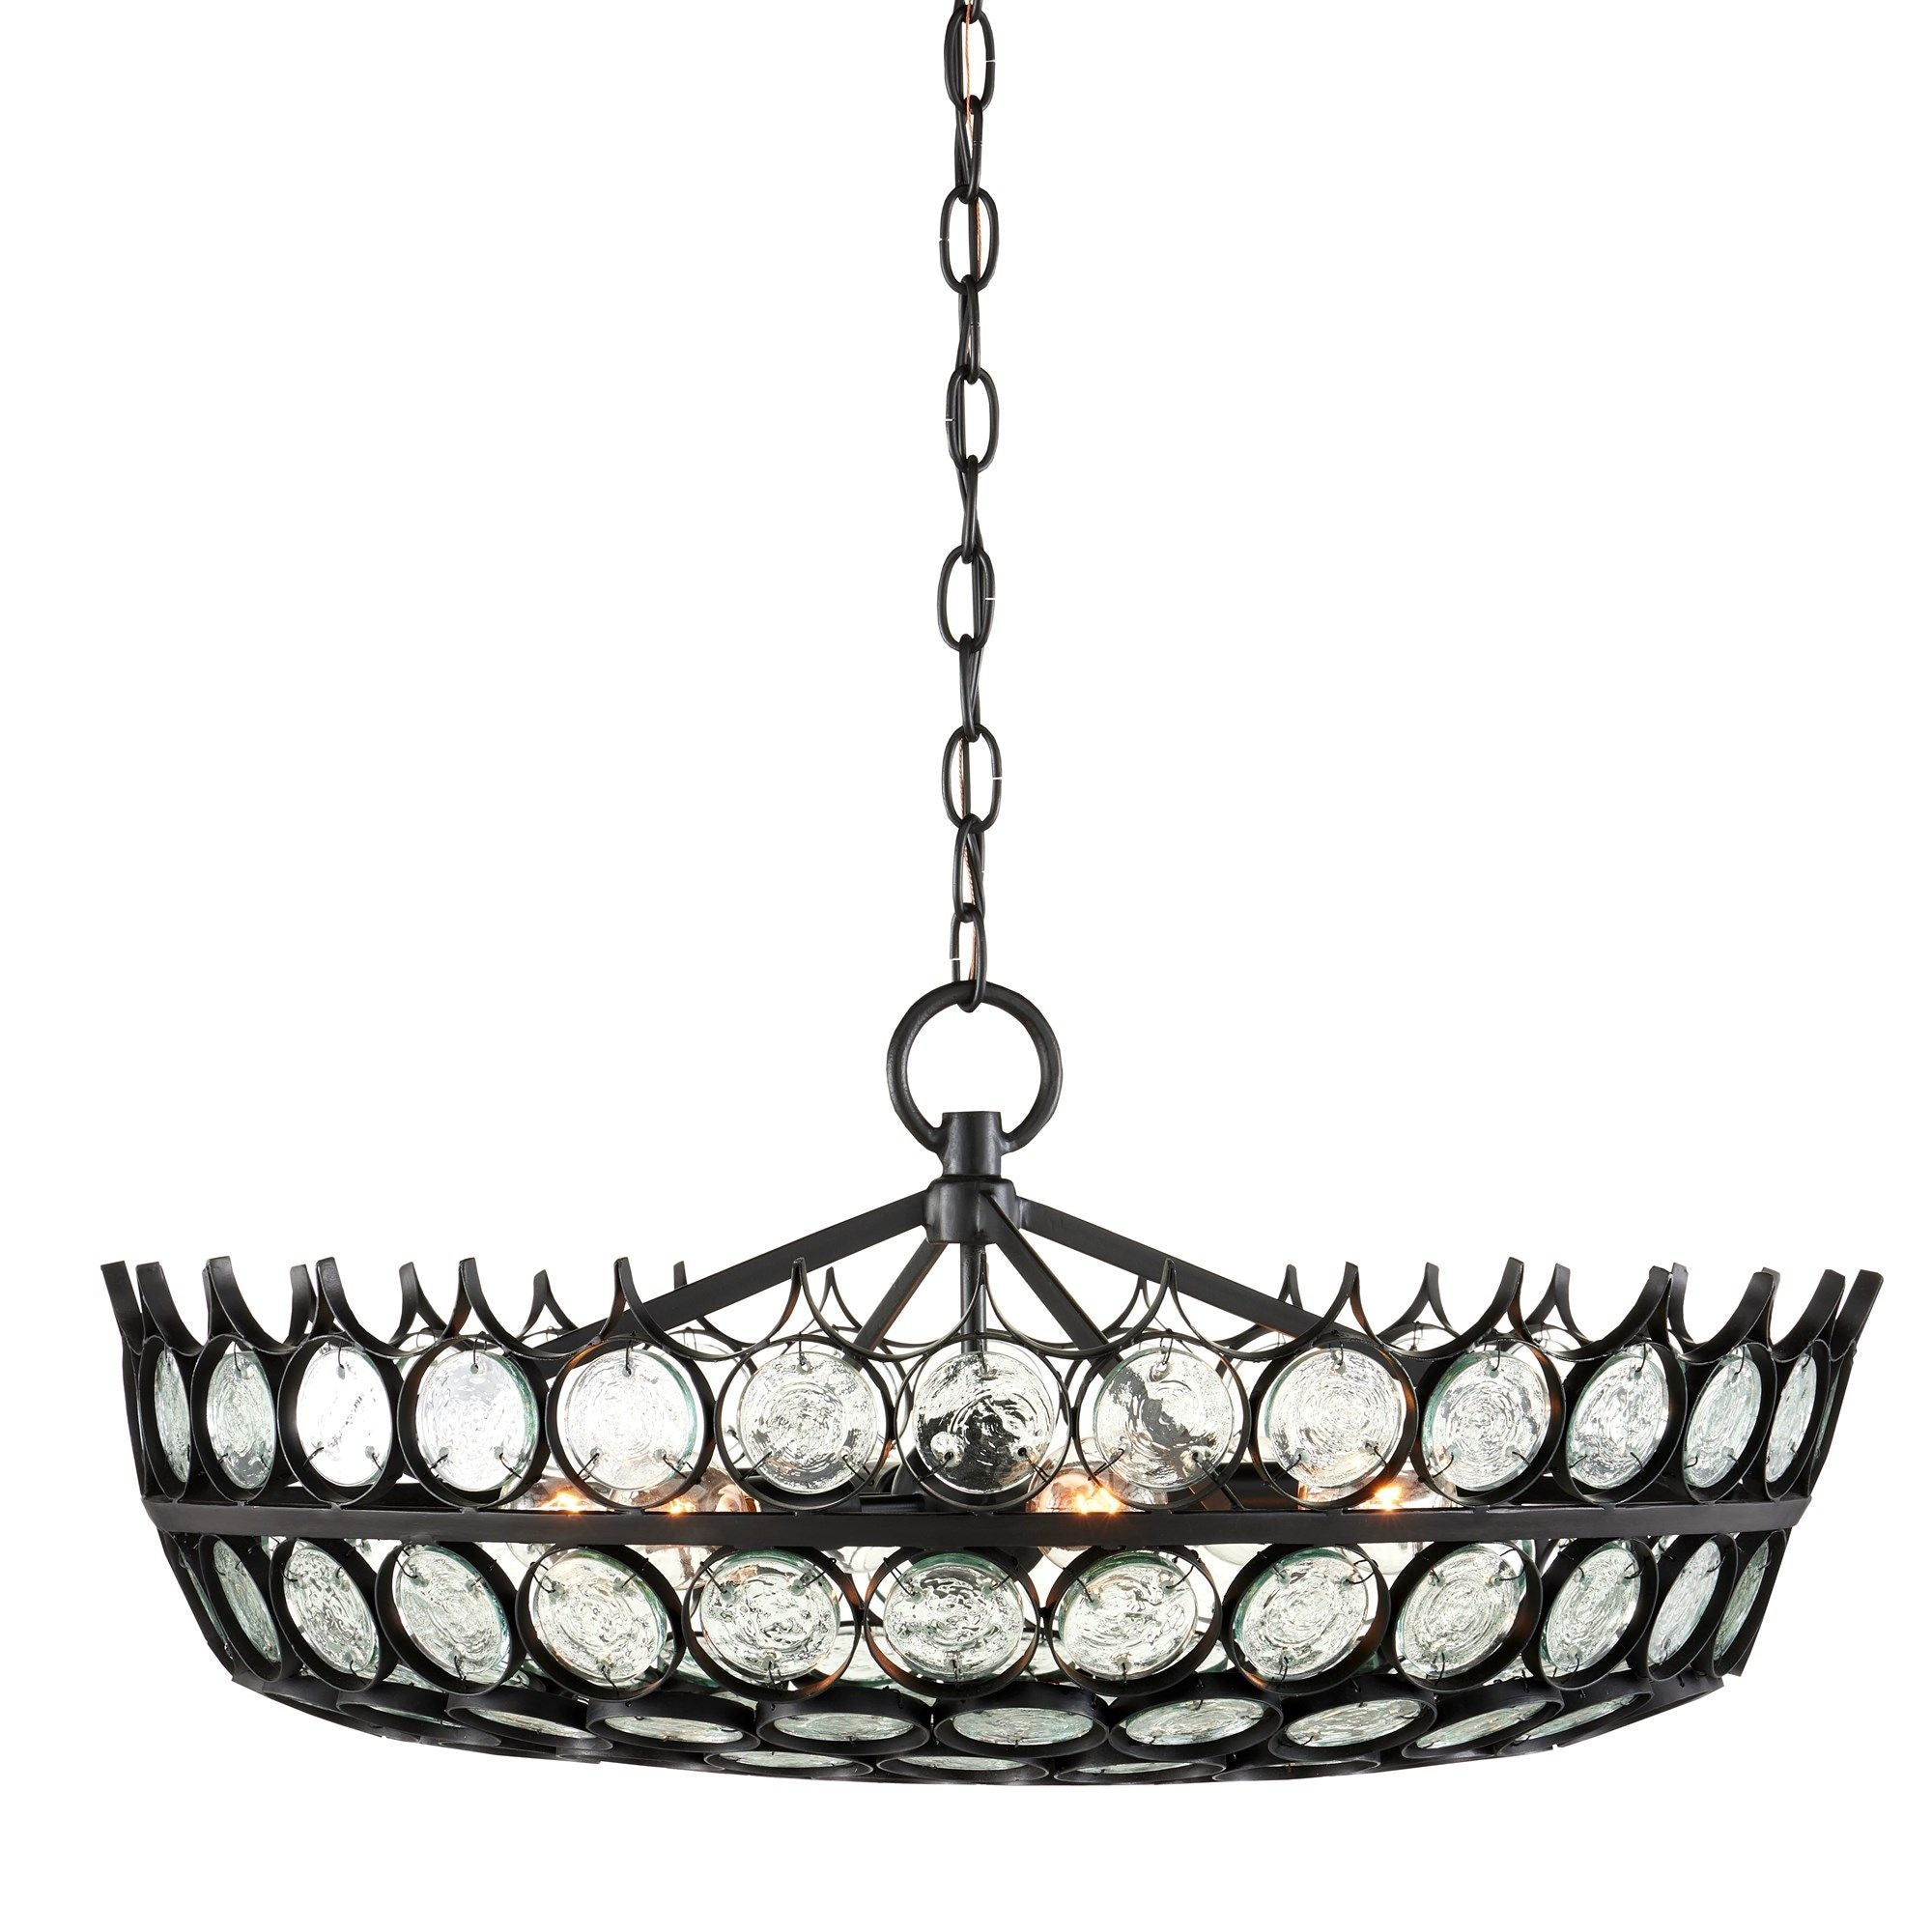 Augustus Small Recycled Glass Chandelier - Satin Black/Clear